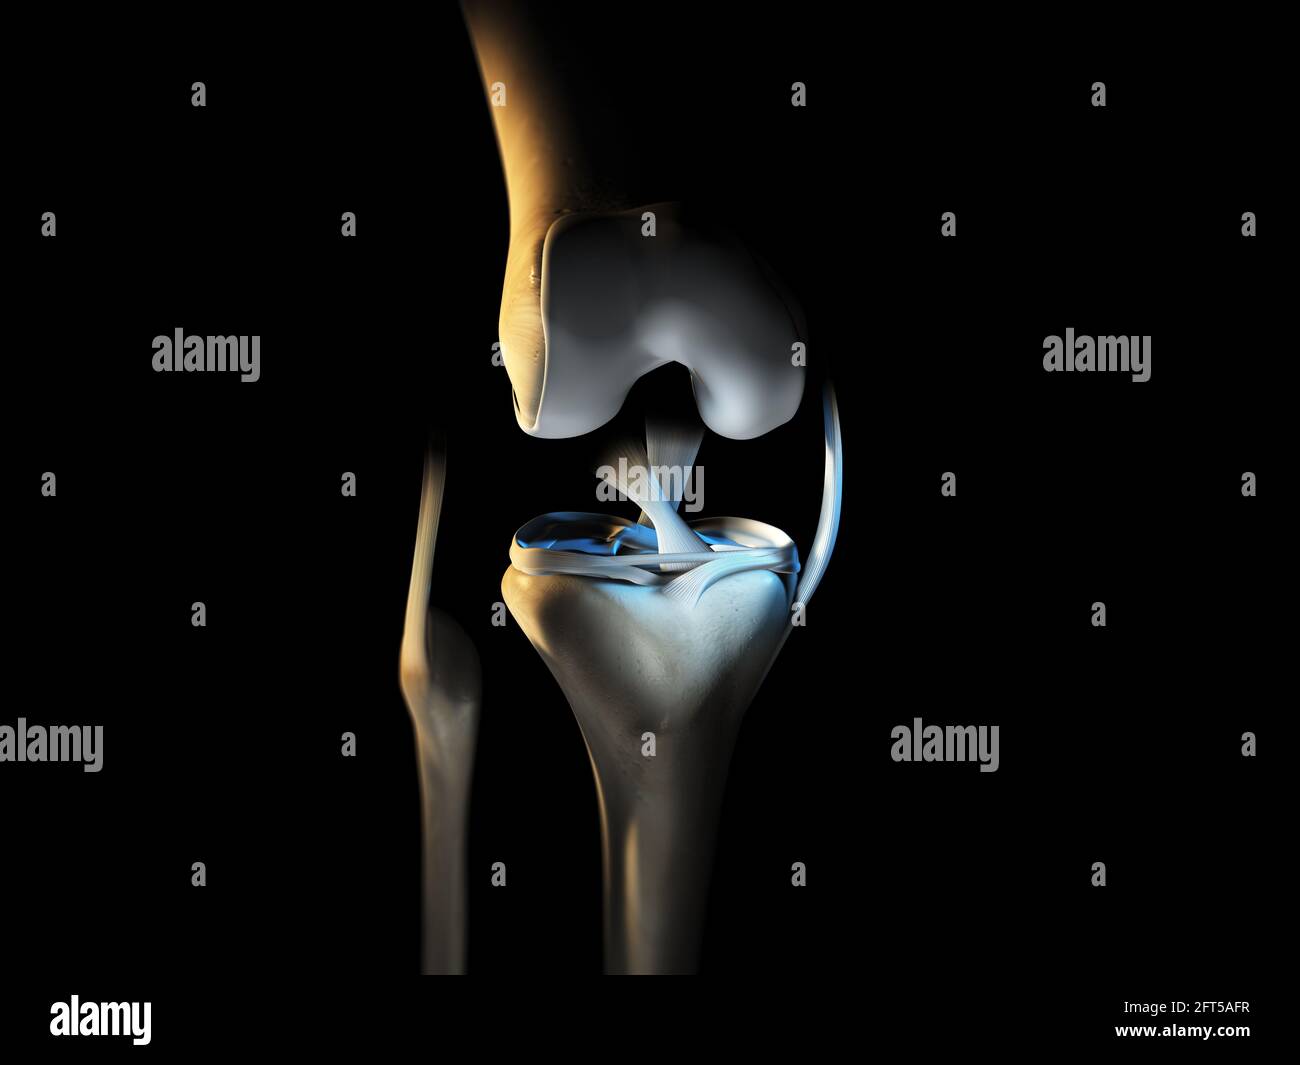 3D illustration showing knee joint with ligaments, meniscus, articular cartilage, fibula and tibia. Stock Photo